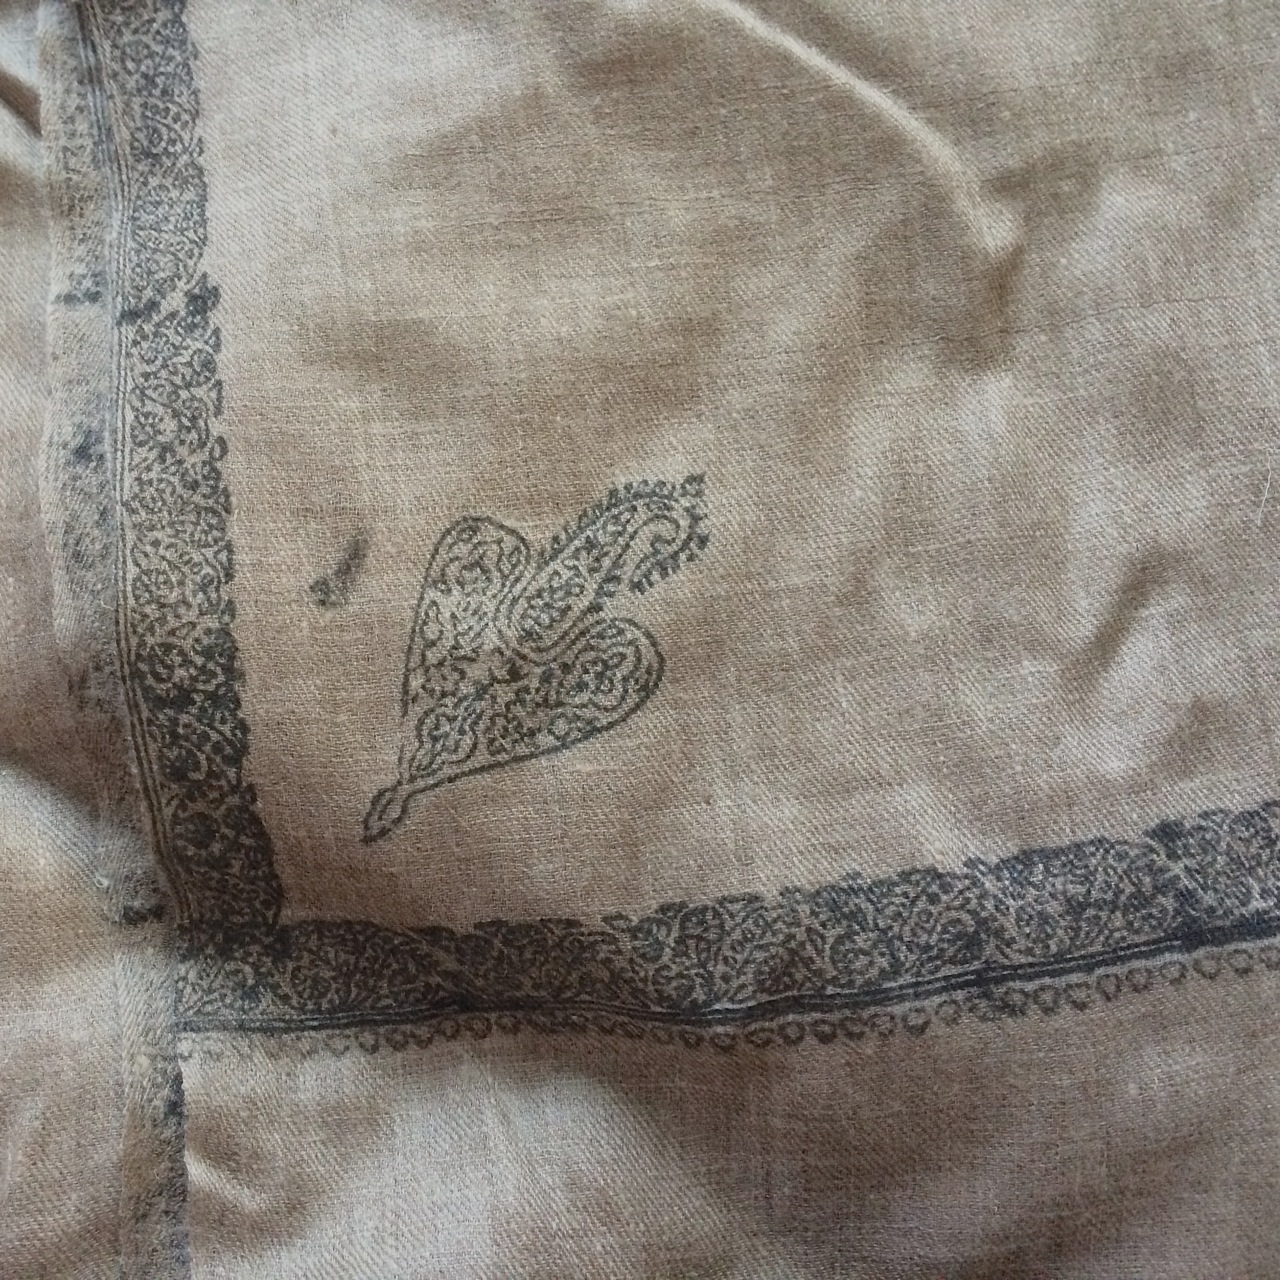 the block printed pattern will serve as a guide for the embroidery